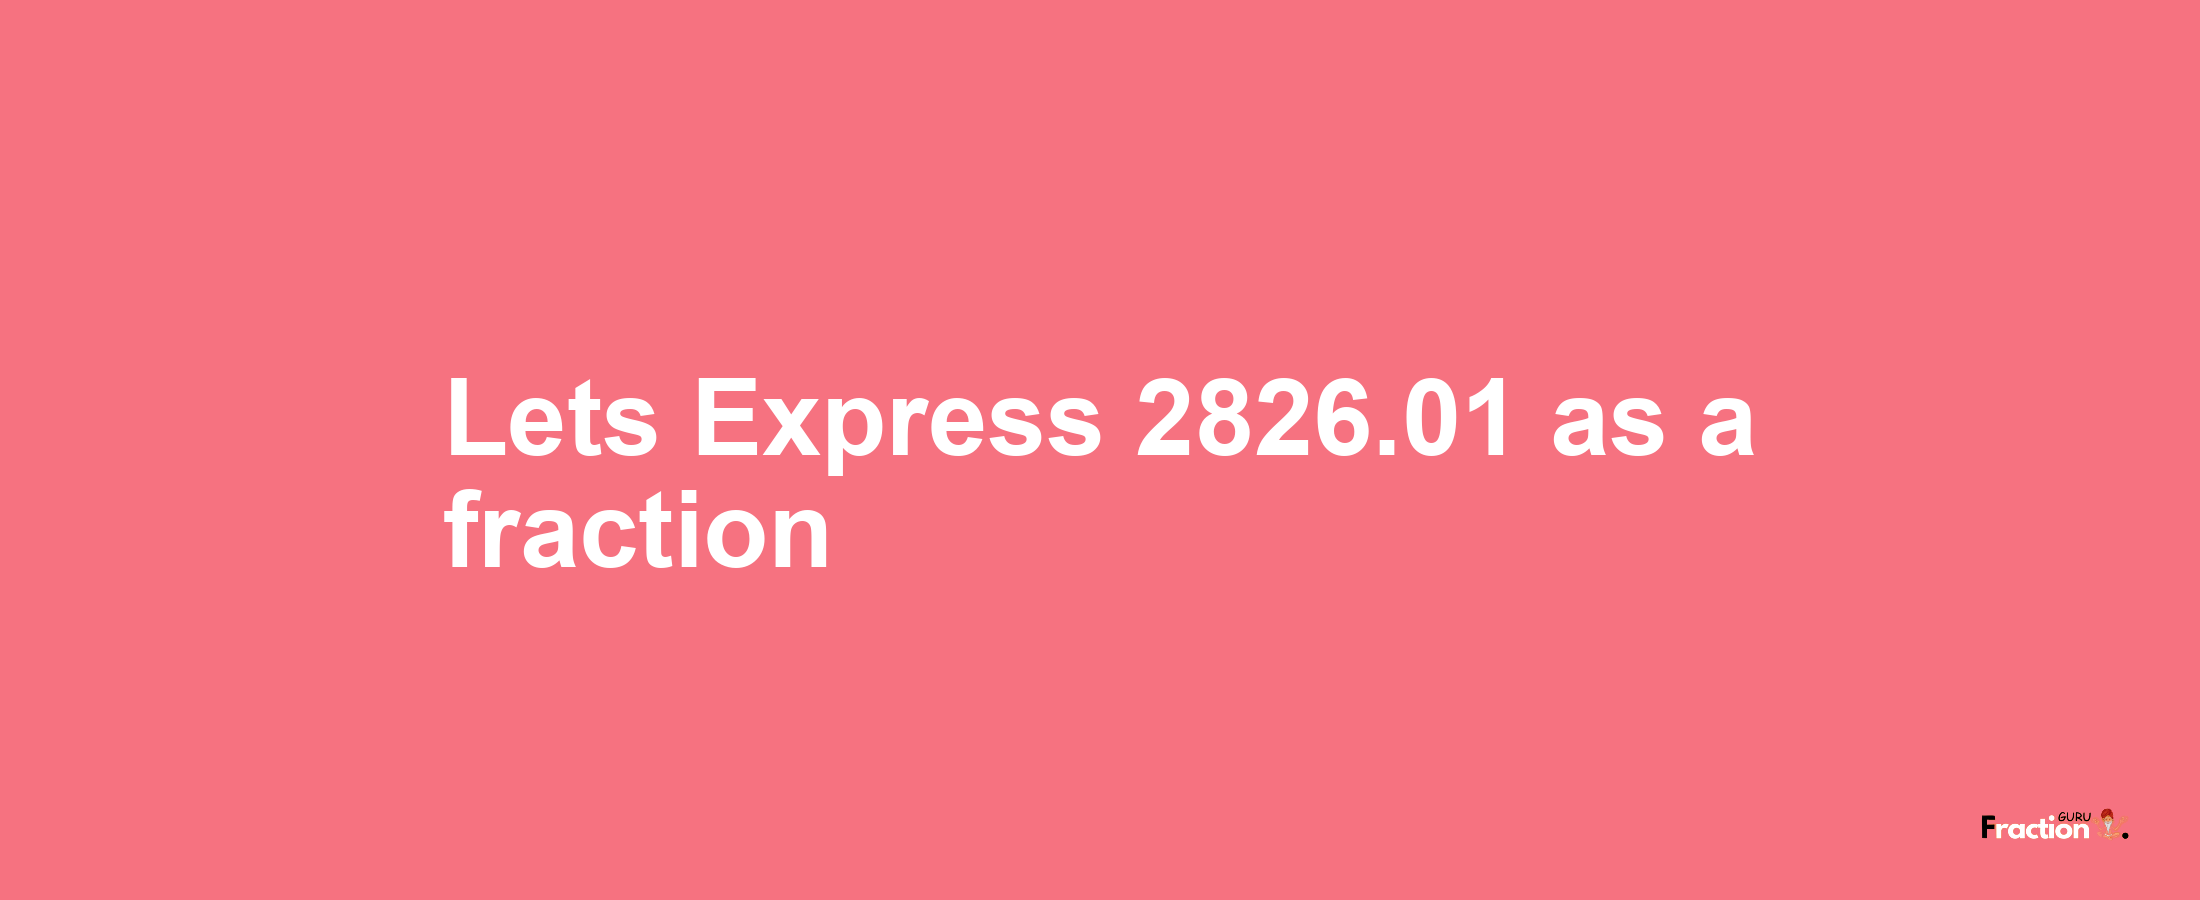 Lets Express 2826.01 as afraction